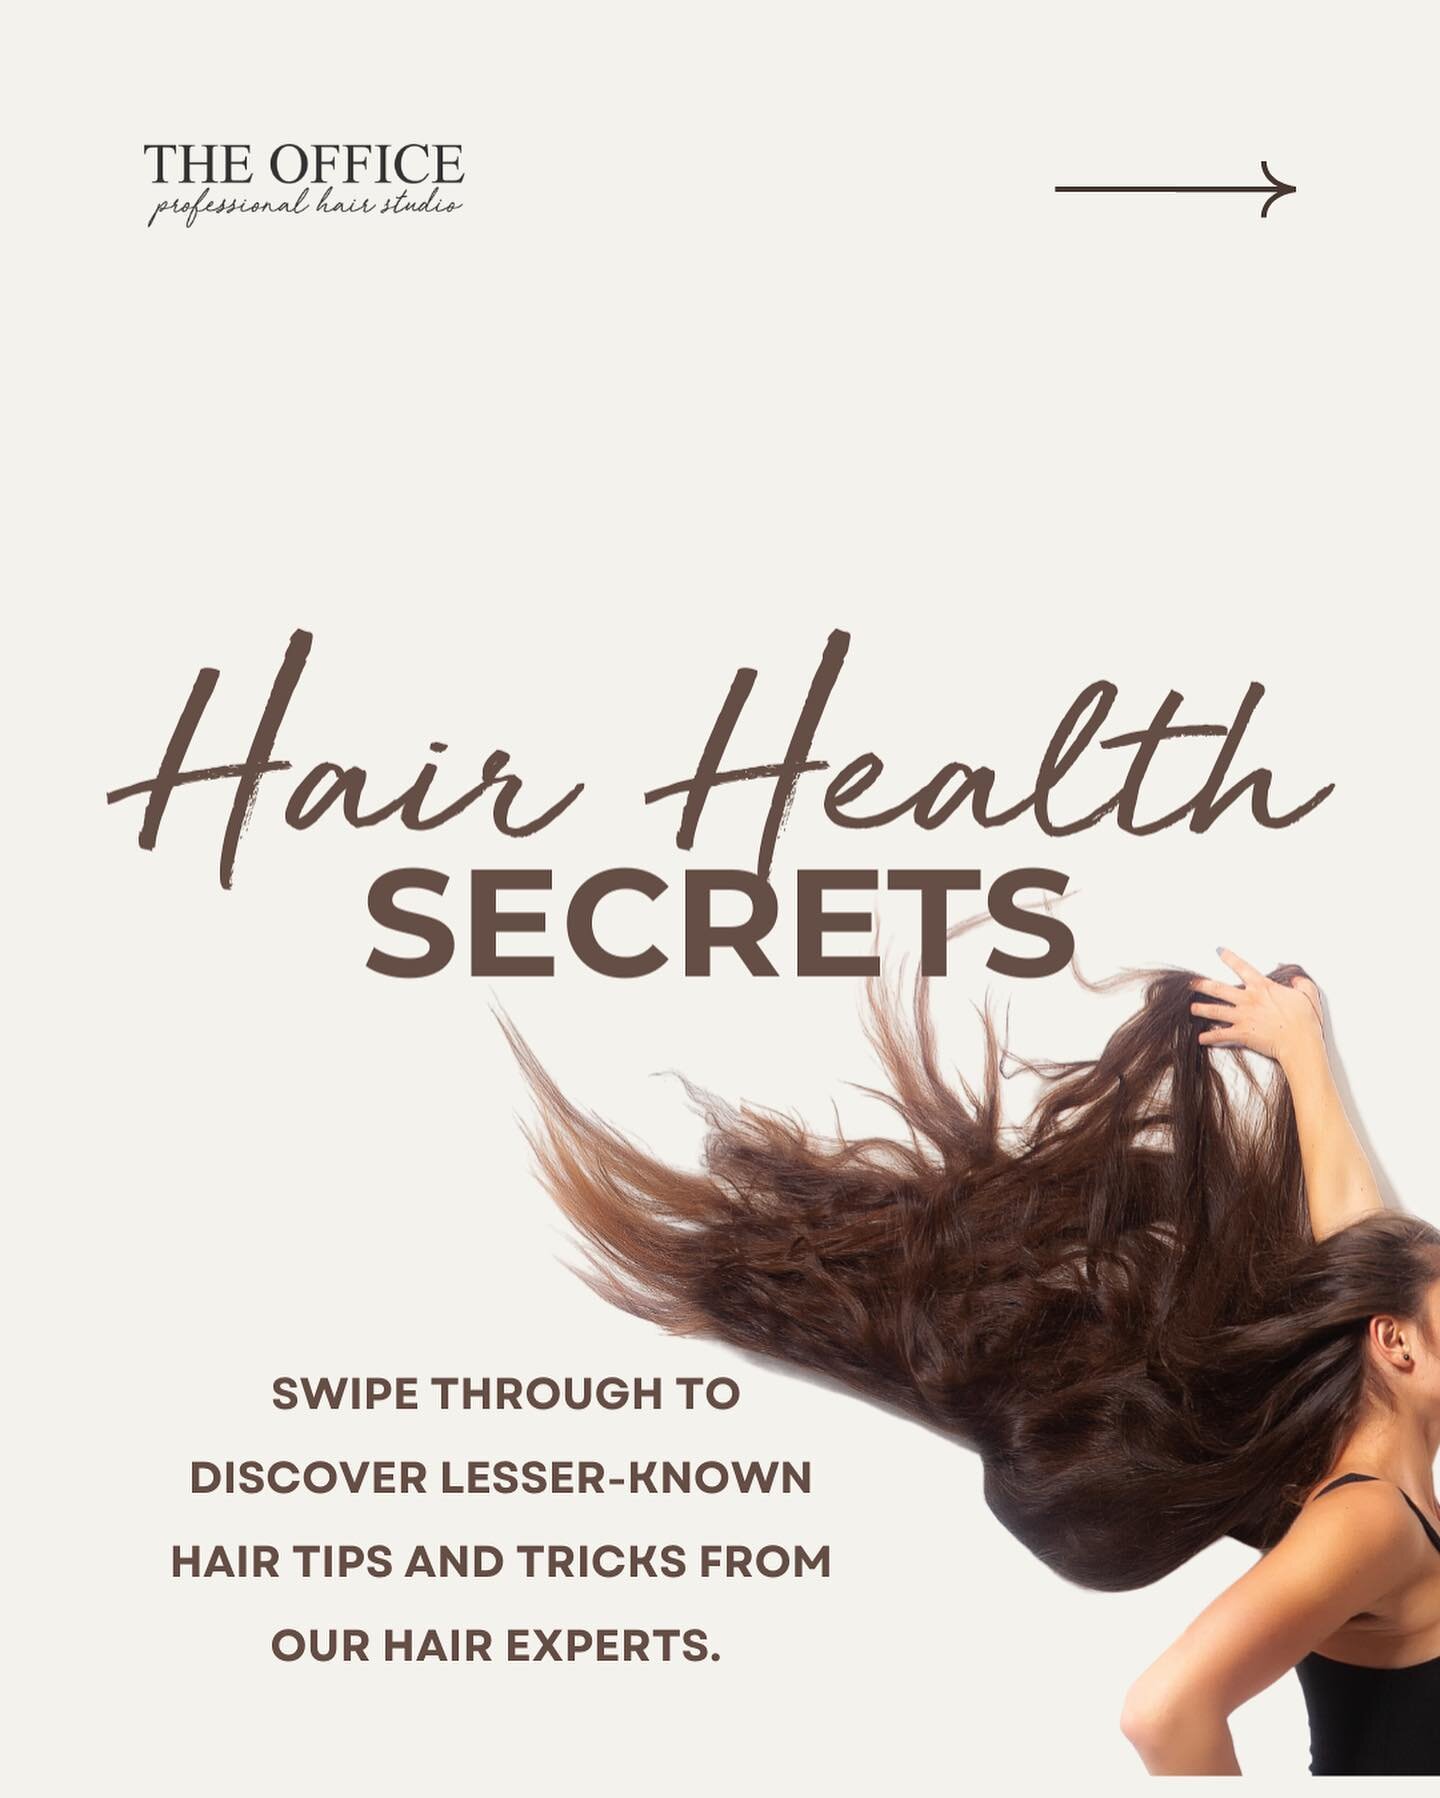 Master Your Hair Care Routine 🌿 Dive into expert hair advice that will elevate your daily routine. Swipe through, learn, and share with friends for healthier, happier hair. #HairHealth #ProTips #HaircareRevolution